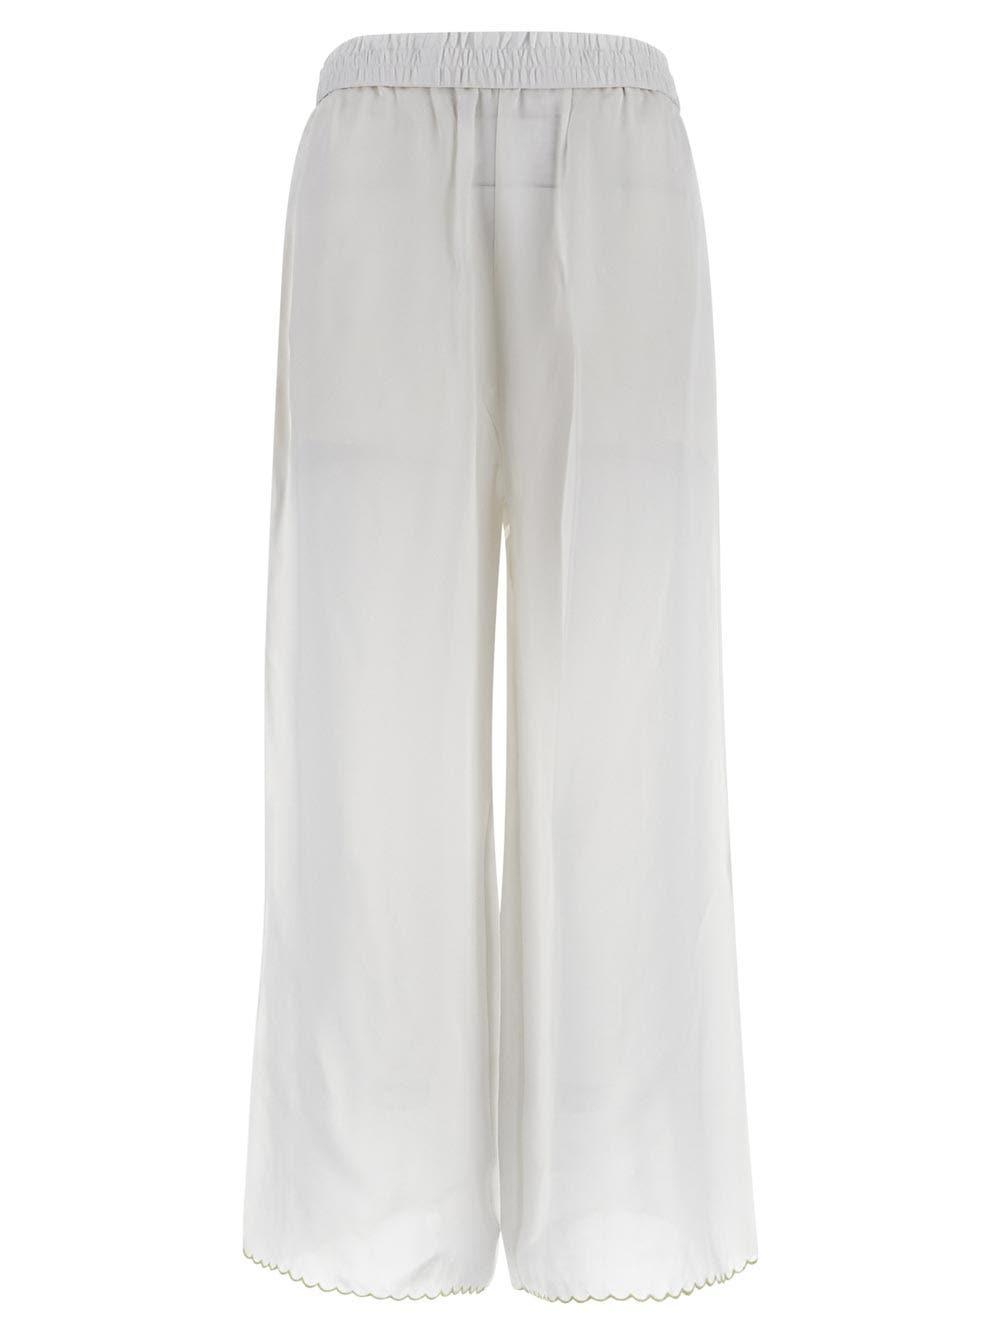 SEE BY CHLOÉ TROUSERS WOMAN